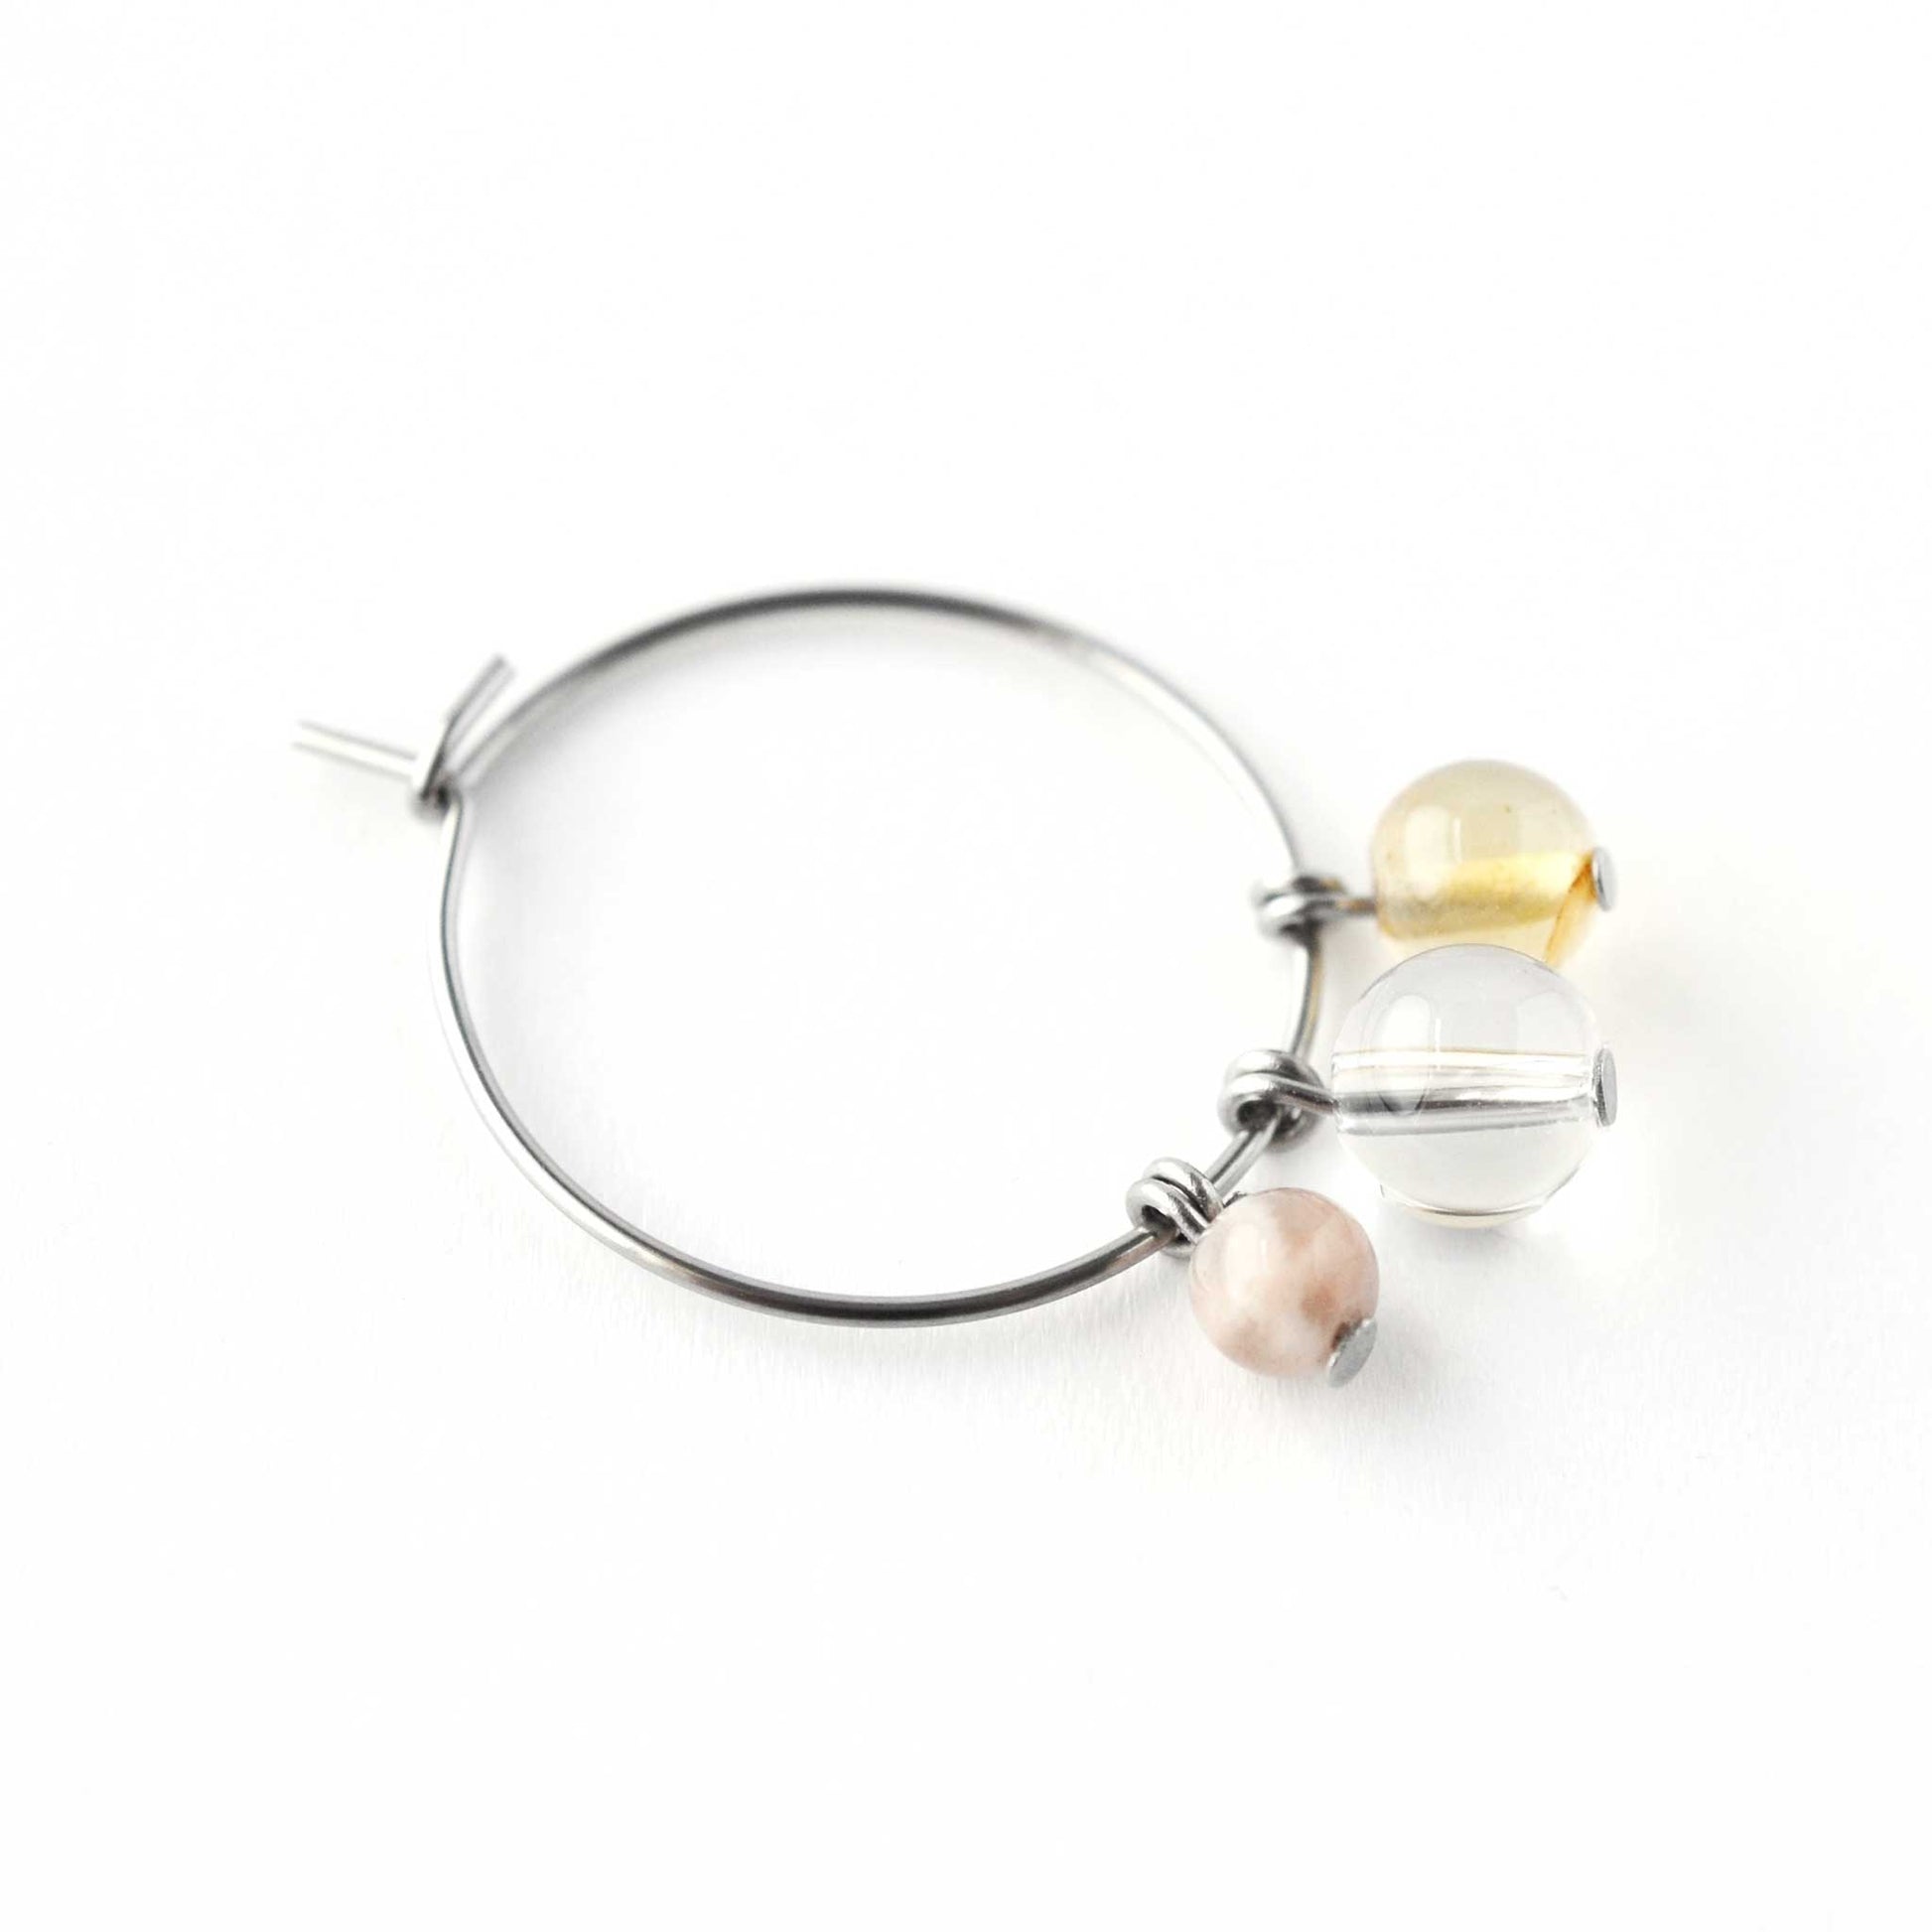 Close up of Sunstone, Rock Crystal & Citrine round gemstone beads hanging from hoop earring